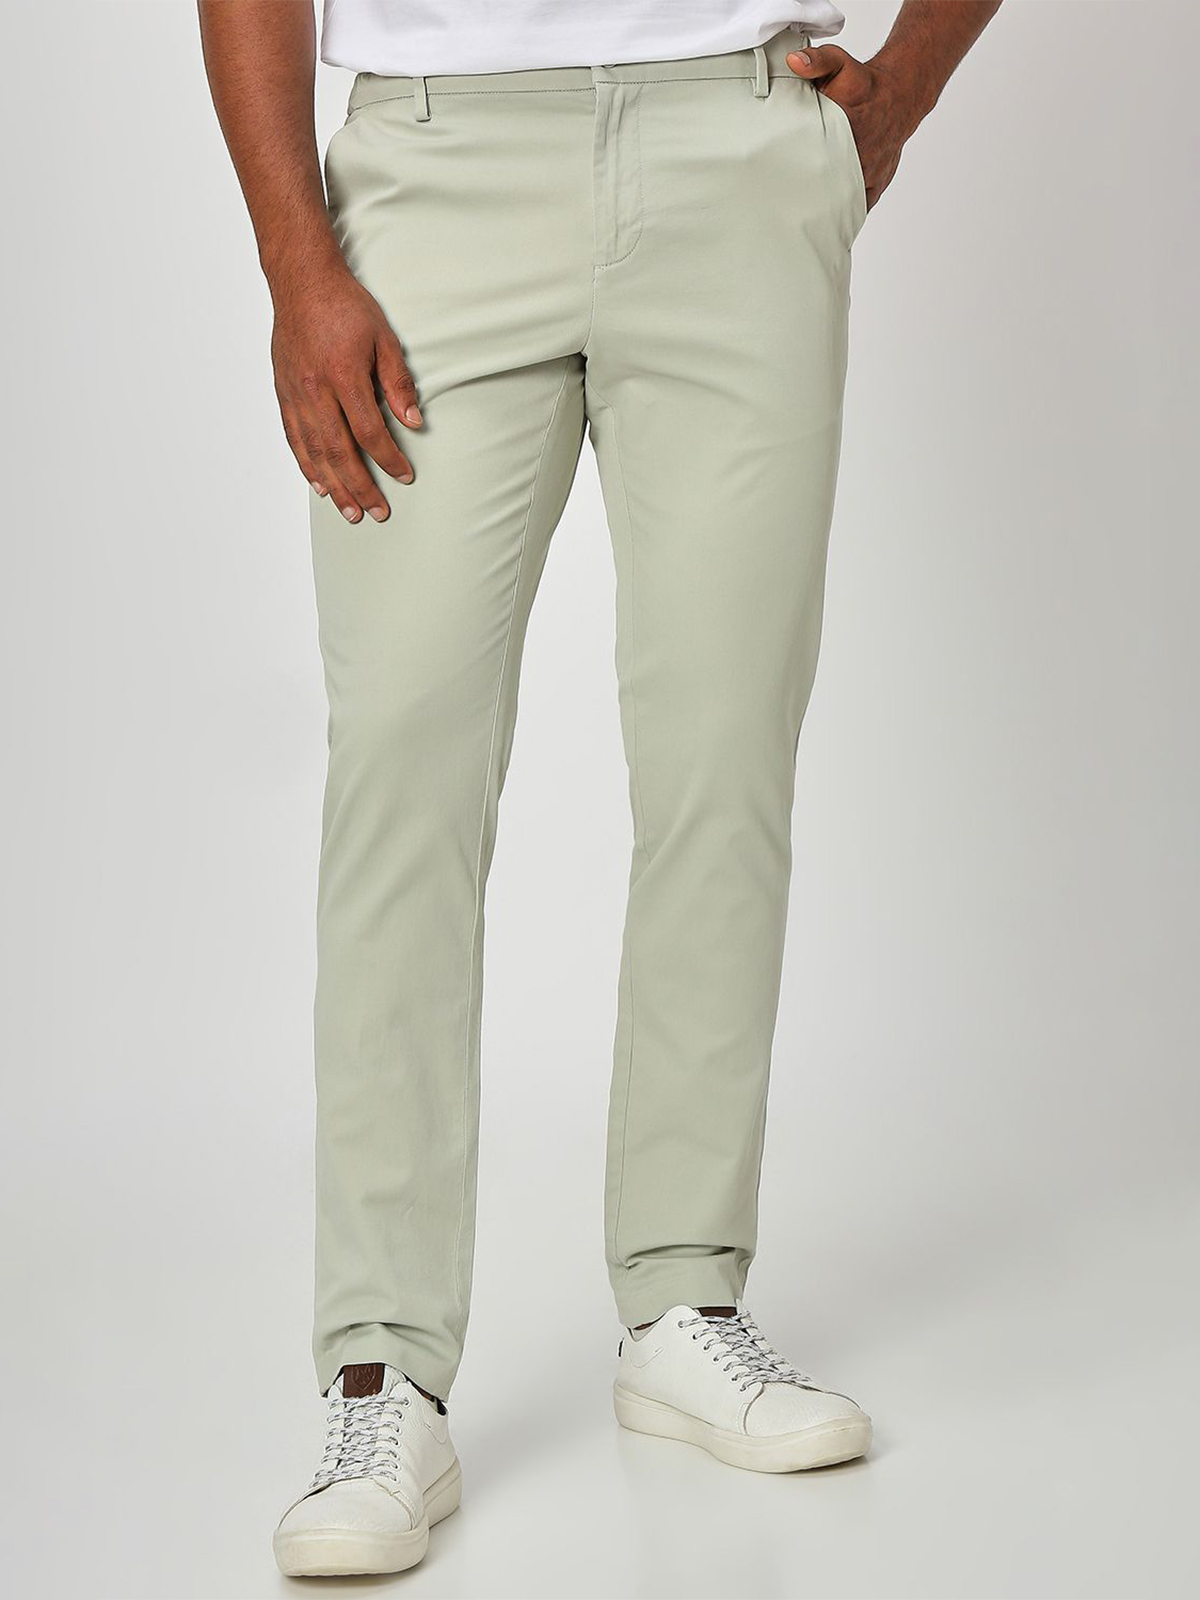 INDICLUB Slim Fit Men Light Green Trousers - Buy INDICLUB Slim Fit Men Light  Green Trousers Online at Best Prices in India | Flipkart.com